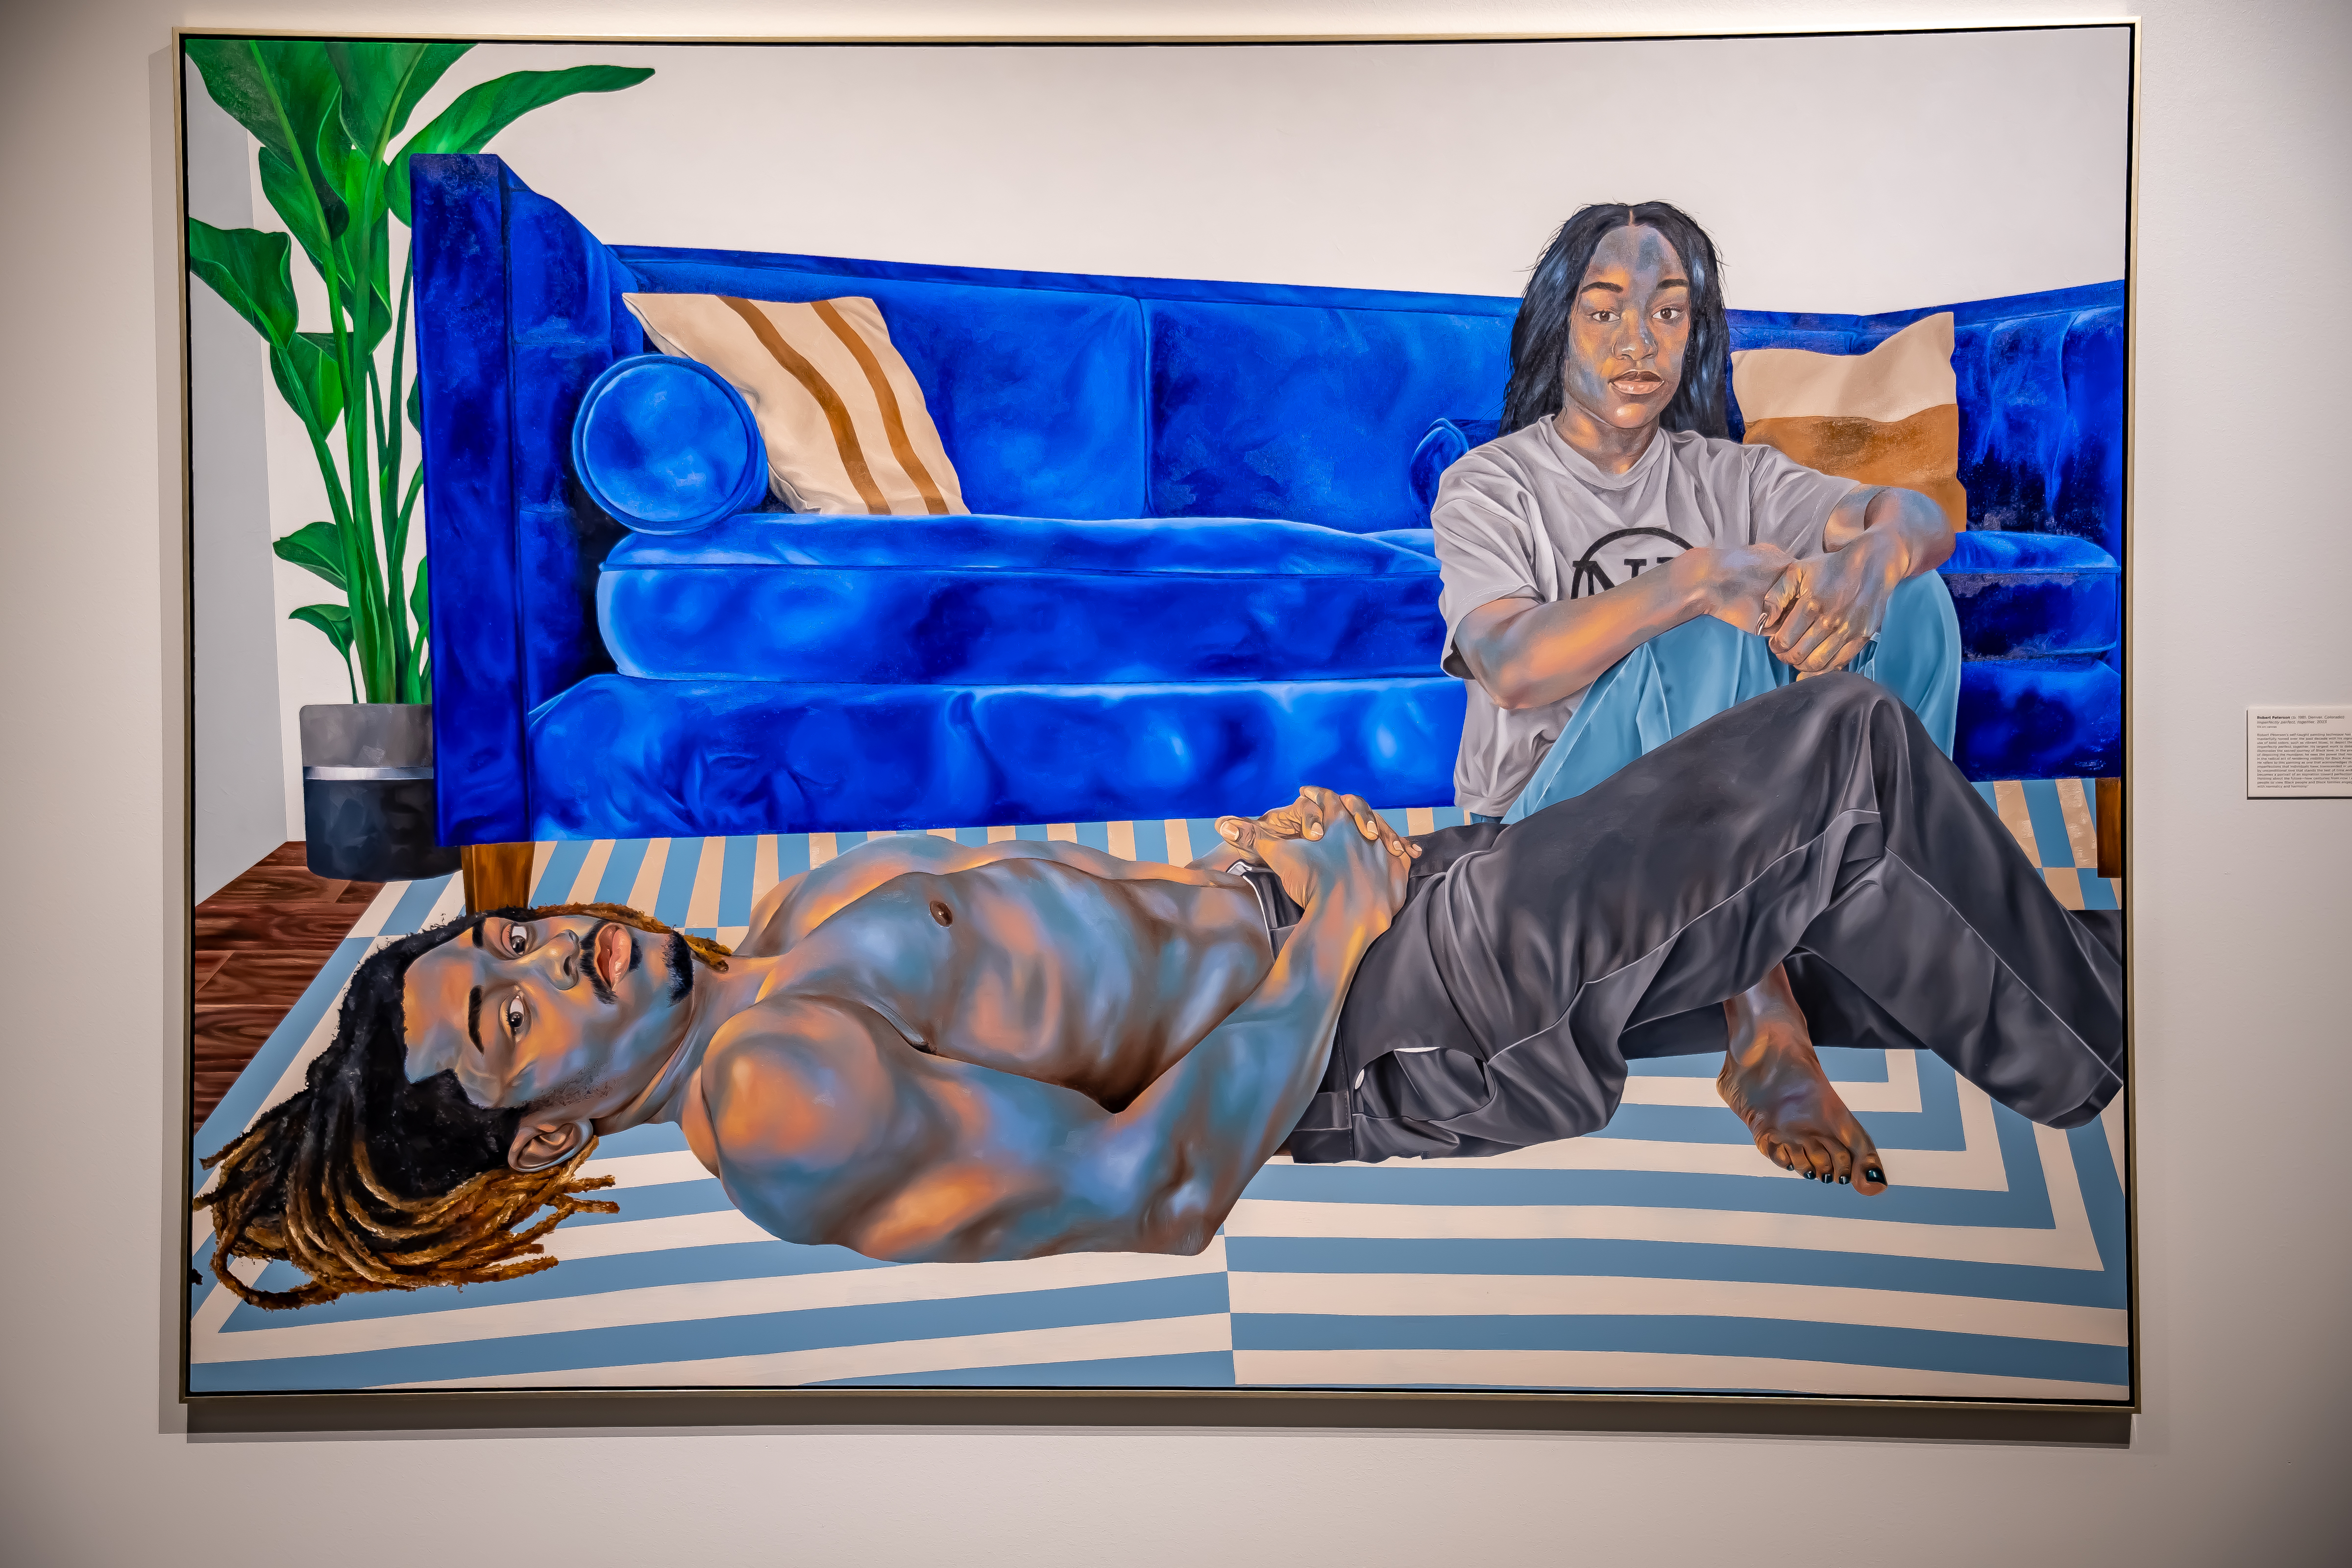 A painting shows two Black people lounging on a blue and white striped rug in front of a stark blue sofa. They are accented in blue and peach tones.